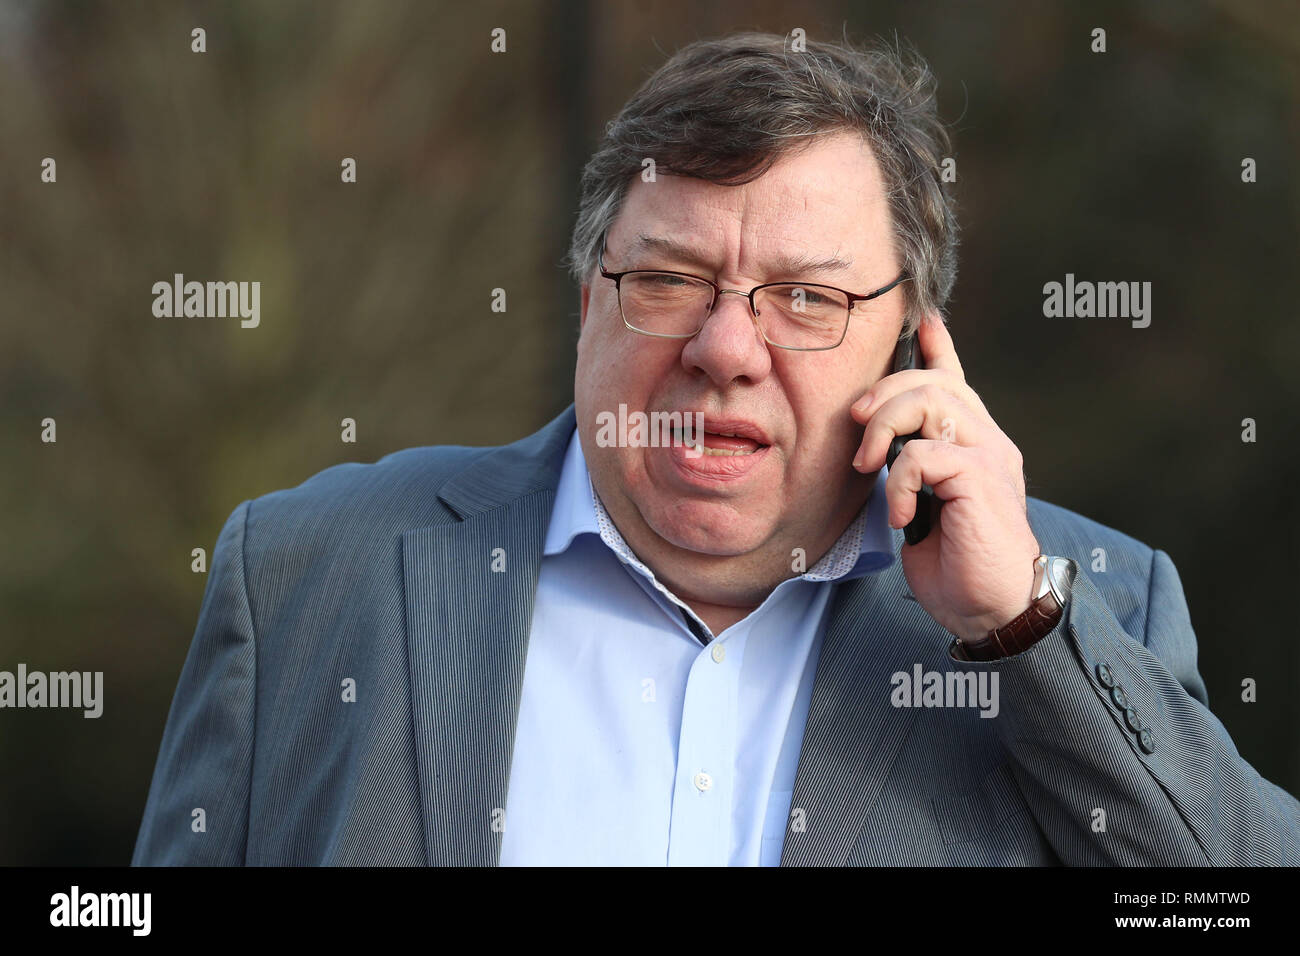 Former Taoiseach Brian Cowen arrives at The European Economic and Social Committee conference at Queen's University in Belfast. Stock Photo